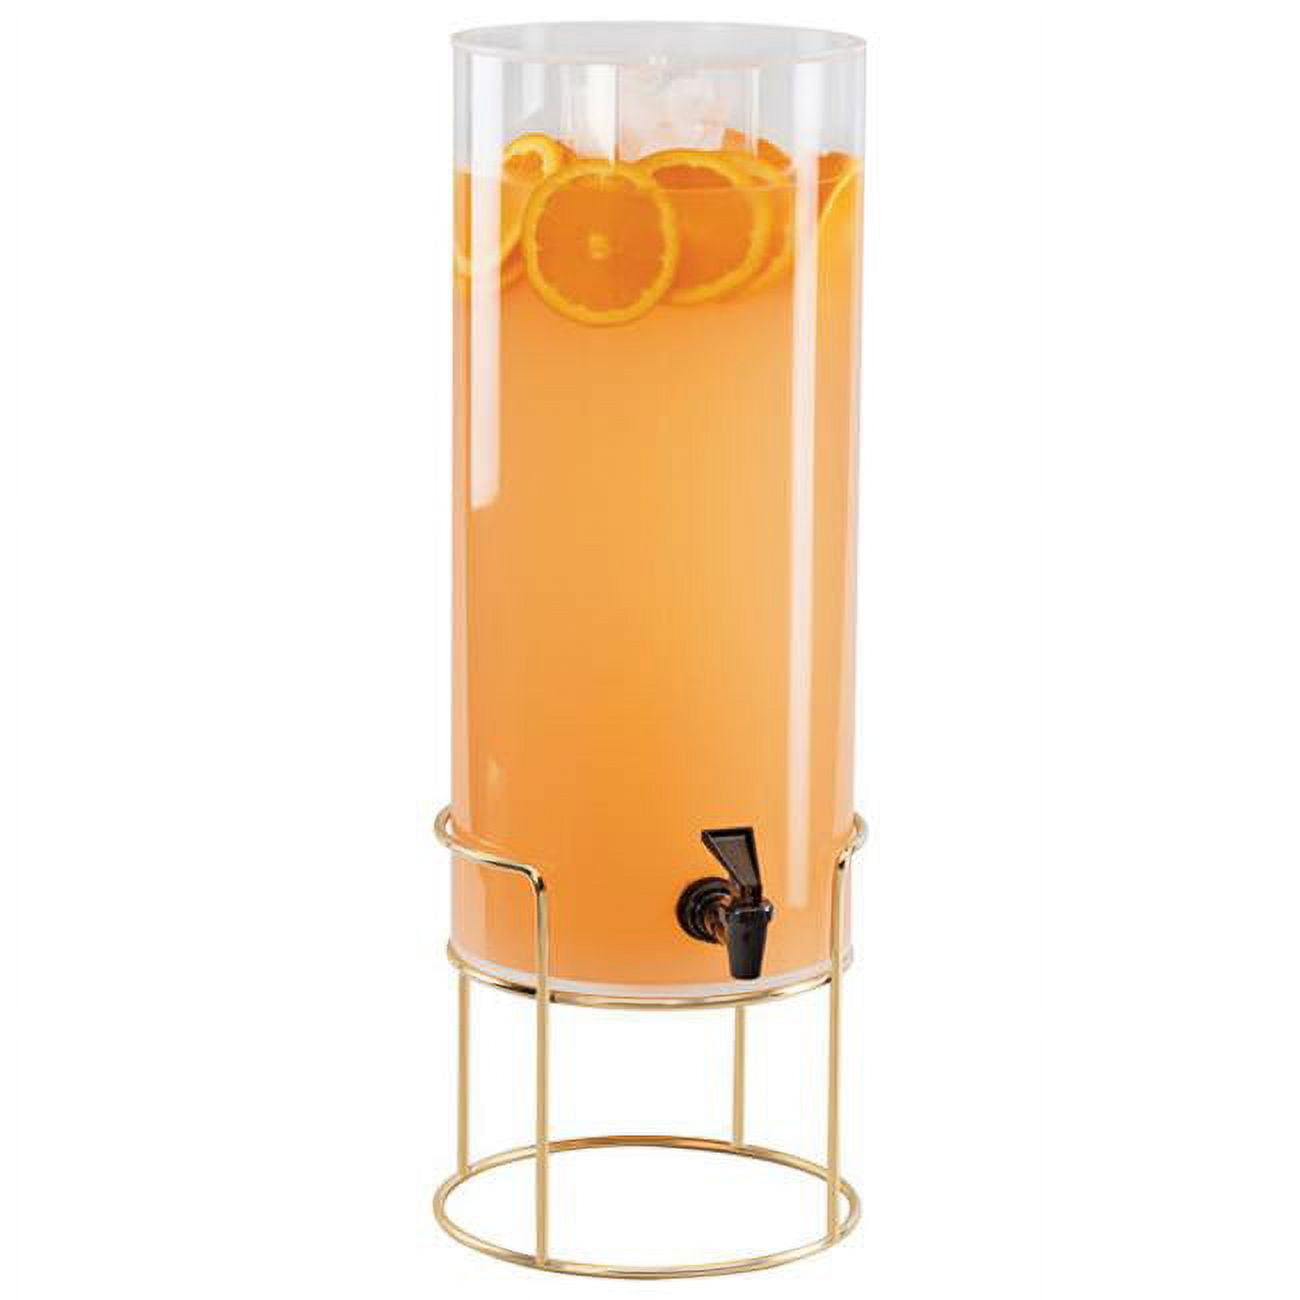 22005-3inf-46 3 Gal Round Beverage Dispenser With Infusion Chamber - Metal Base, Brass - 8.125 X 9.75 X 25.75 In.